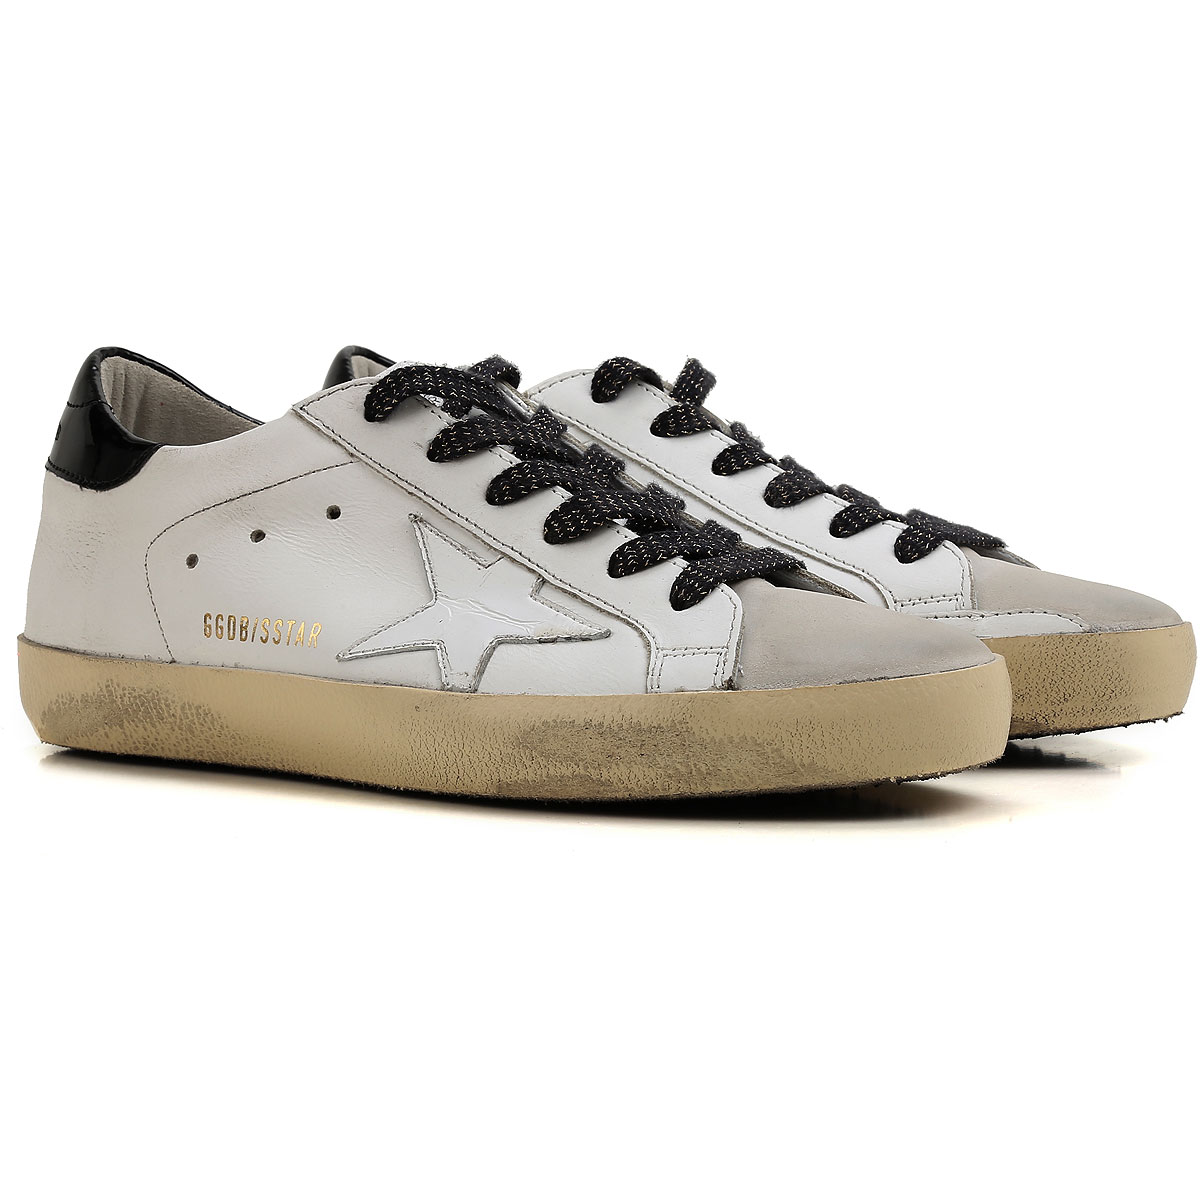 Womens Shoes Golden Goose, Style code: g31ws590-c66-